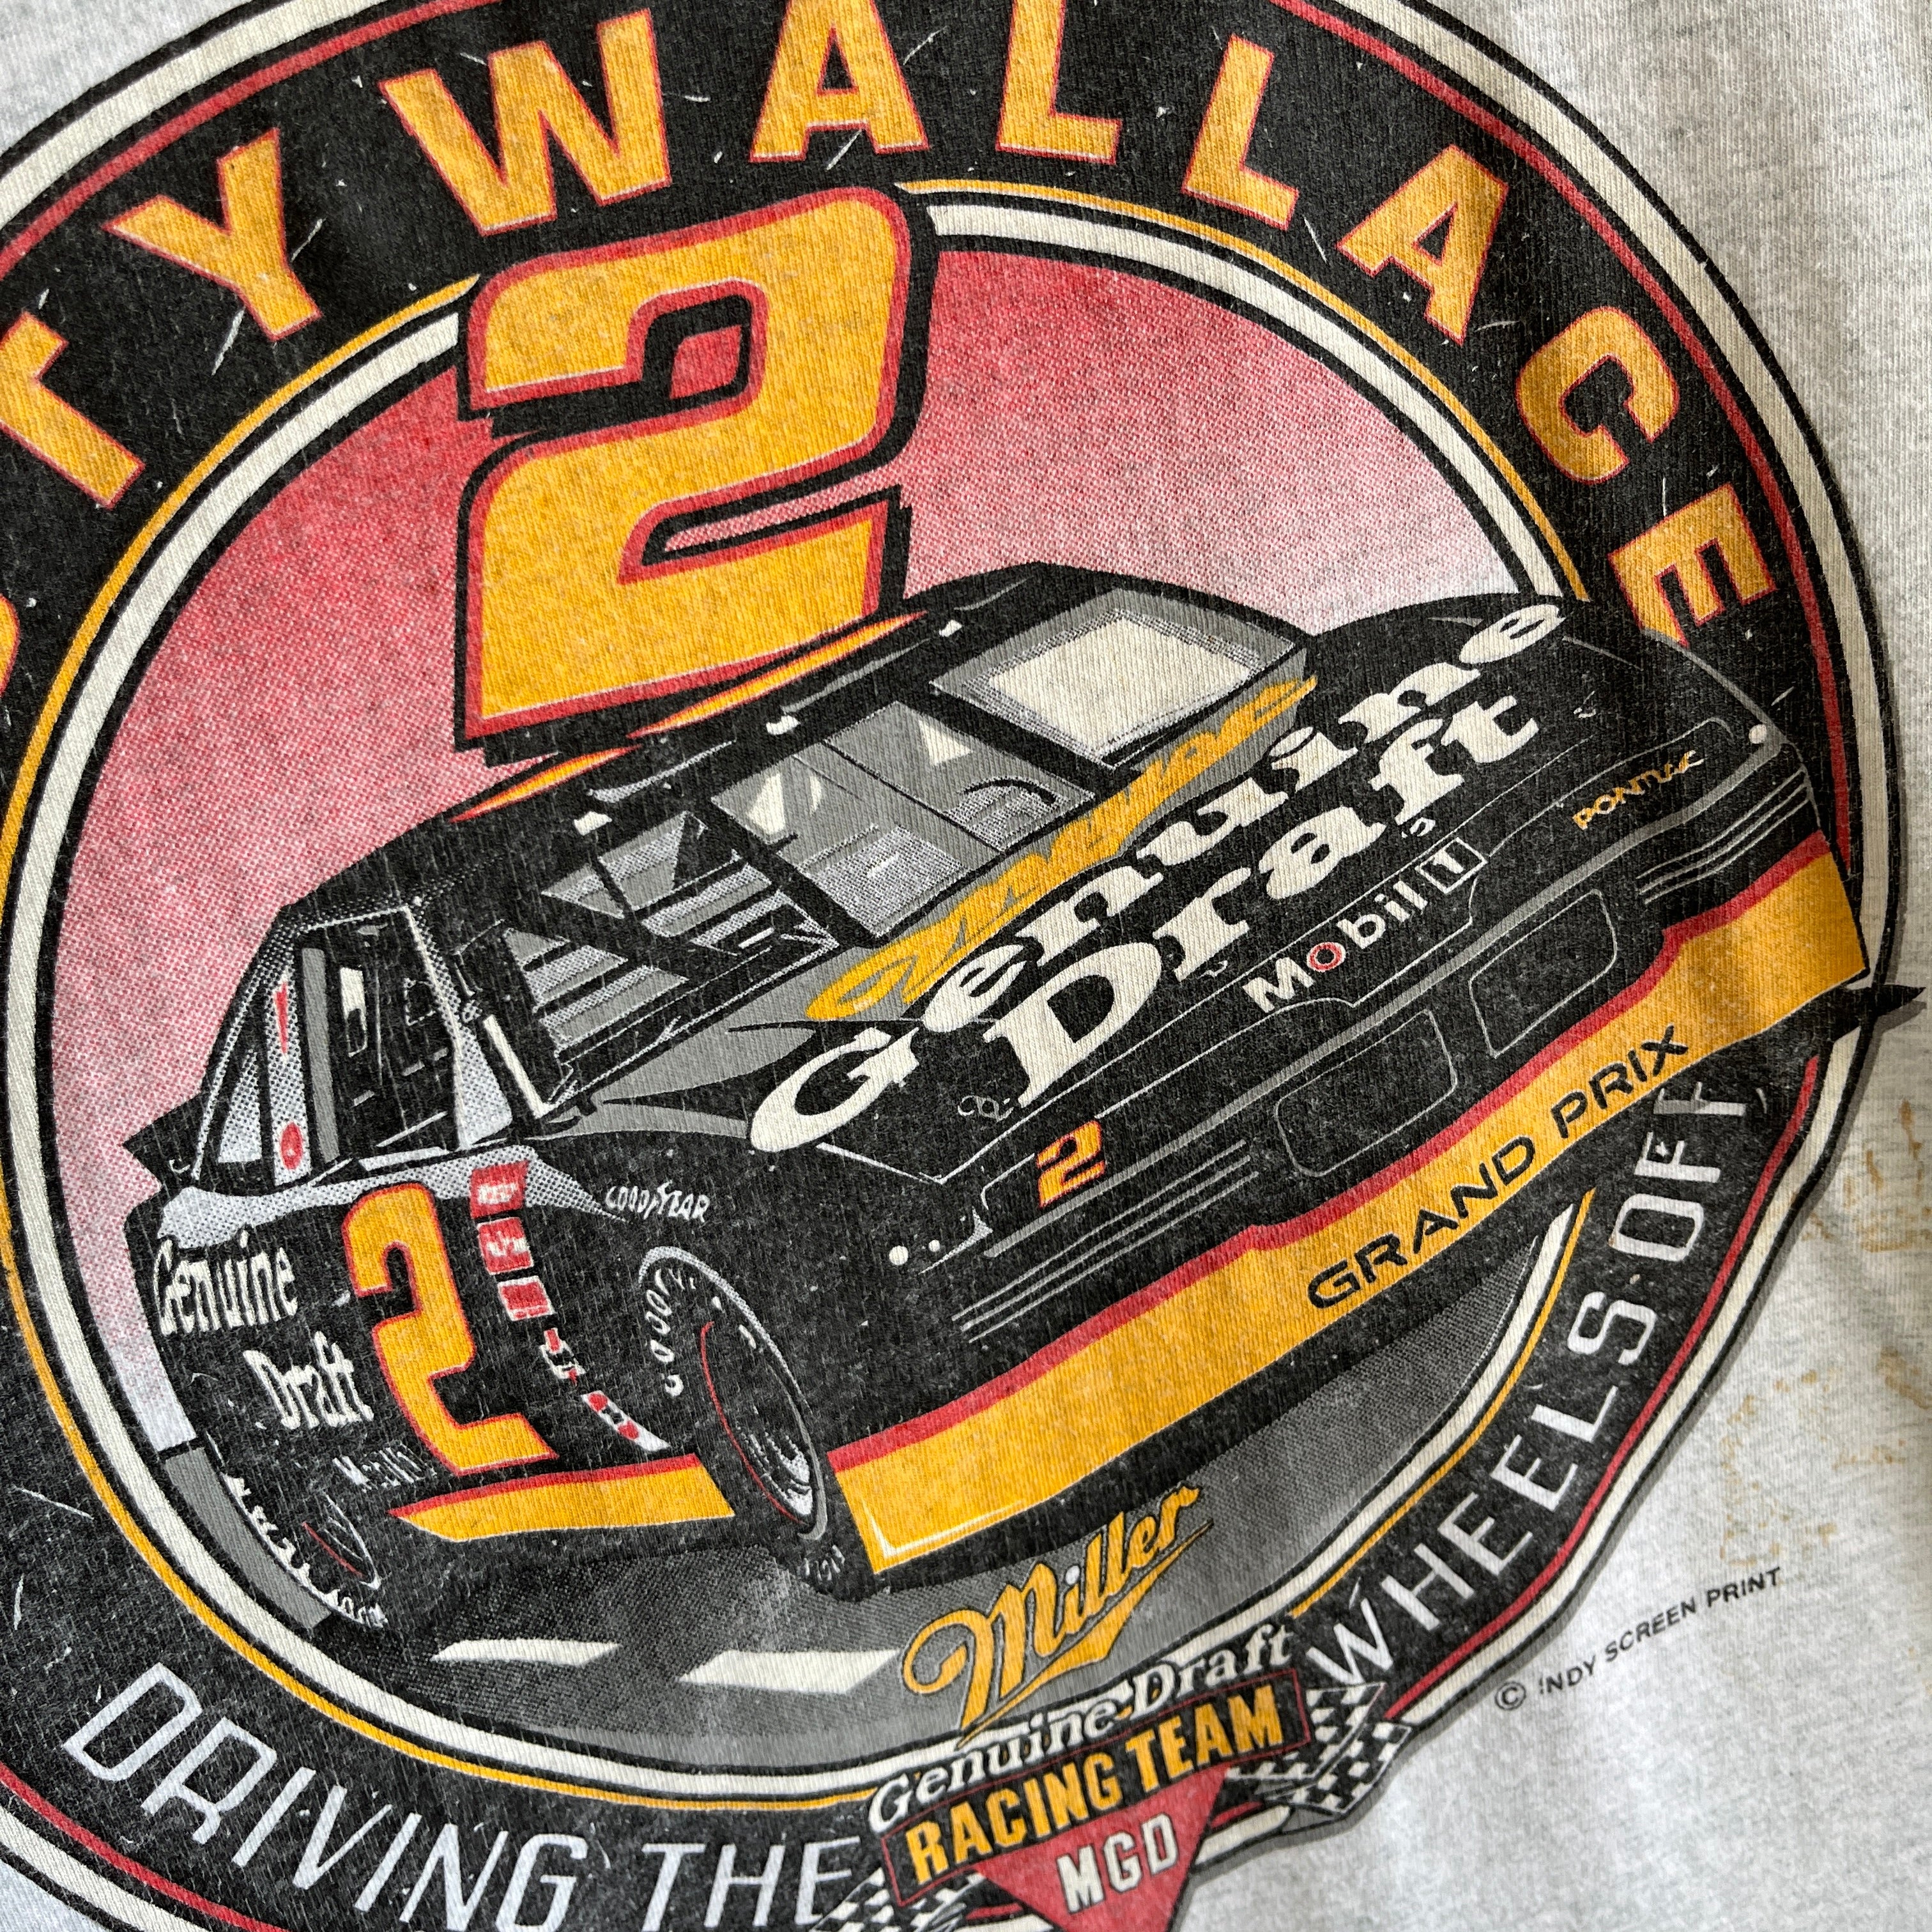 1993 Rusty Wallace Front and Back T-Shirt